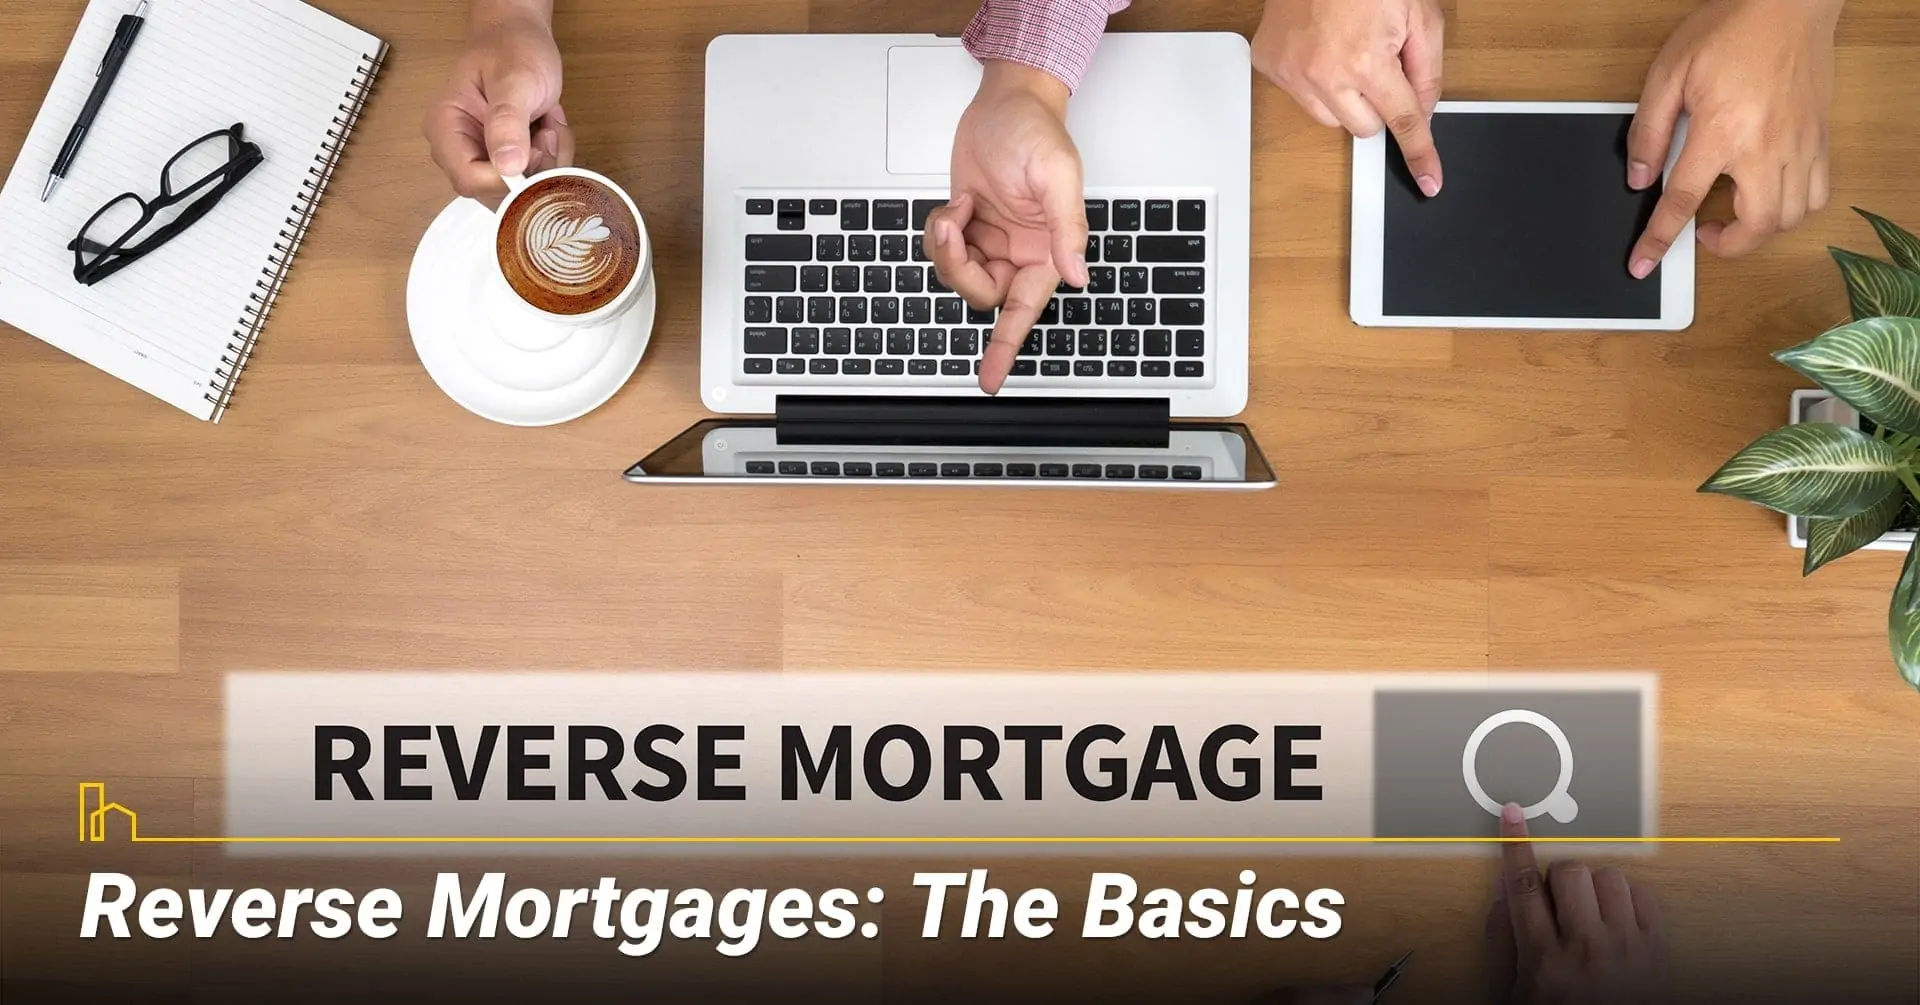 Reverse Mortgages: What are The Basics? Basic information about reverse mortgage